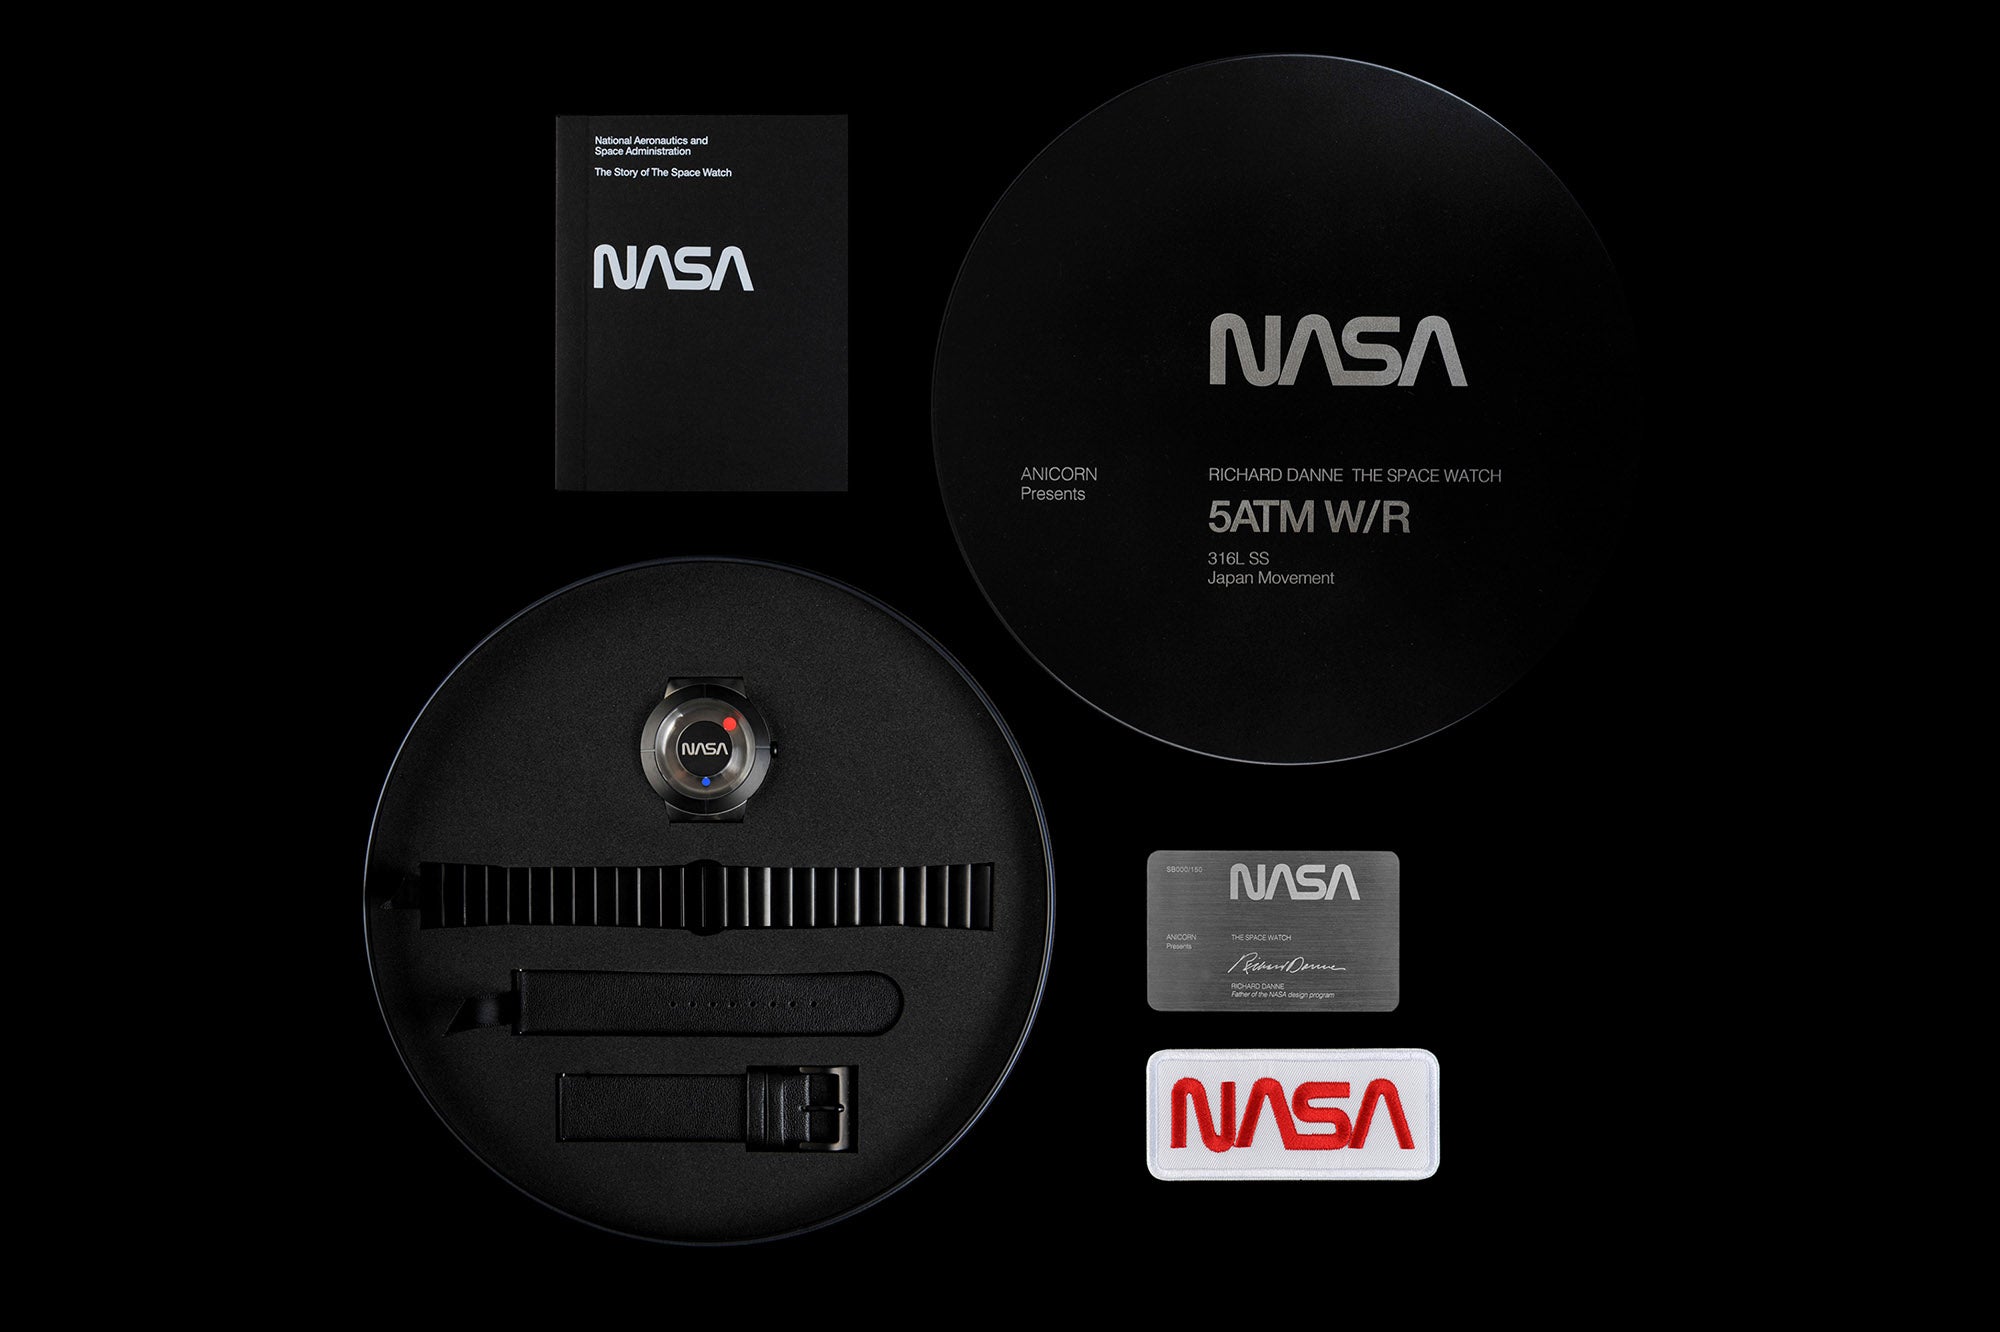 The Space Watch by Richard Danne set with NASA booklet, packaging, extra straps, and a metal card, all emblazoned with NASA branding on a dark surface.